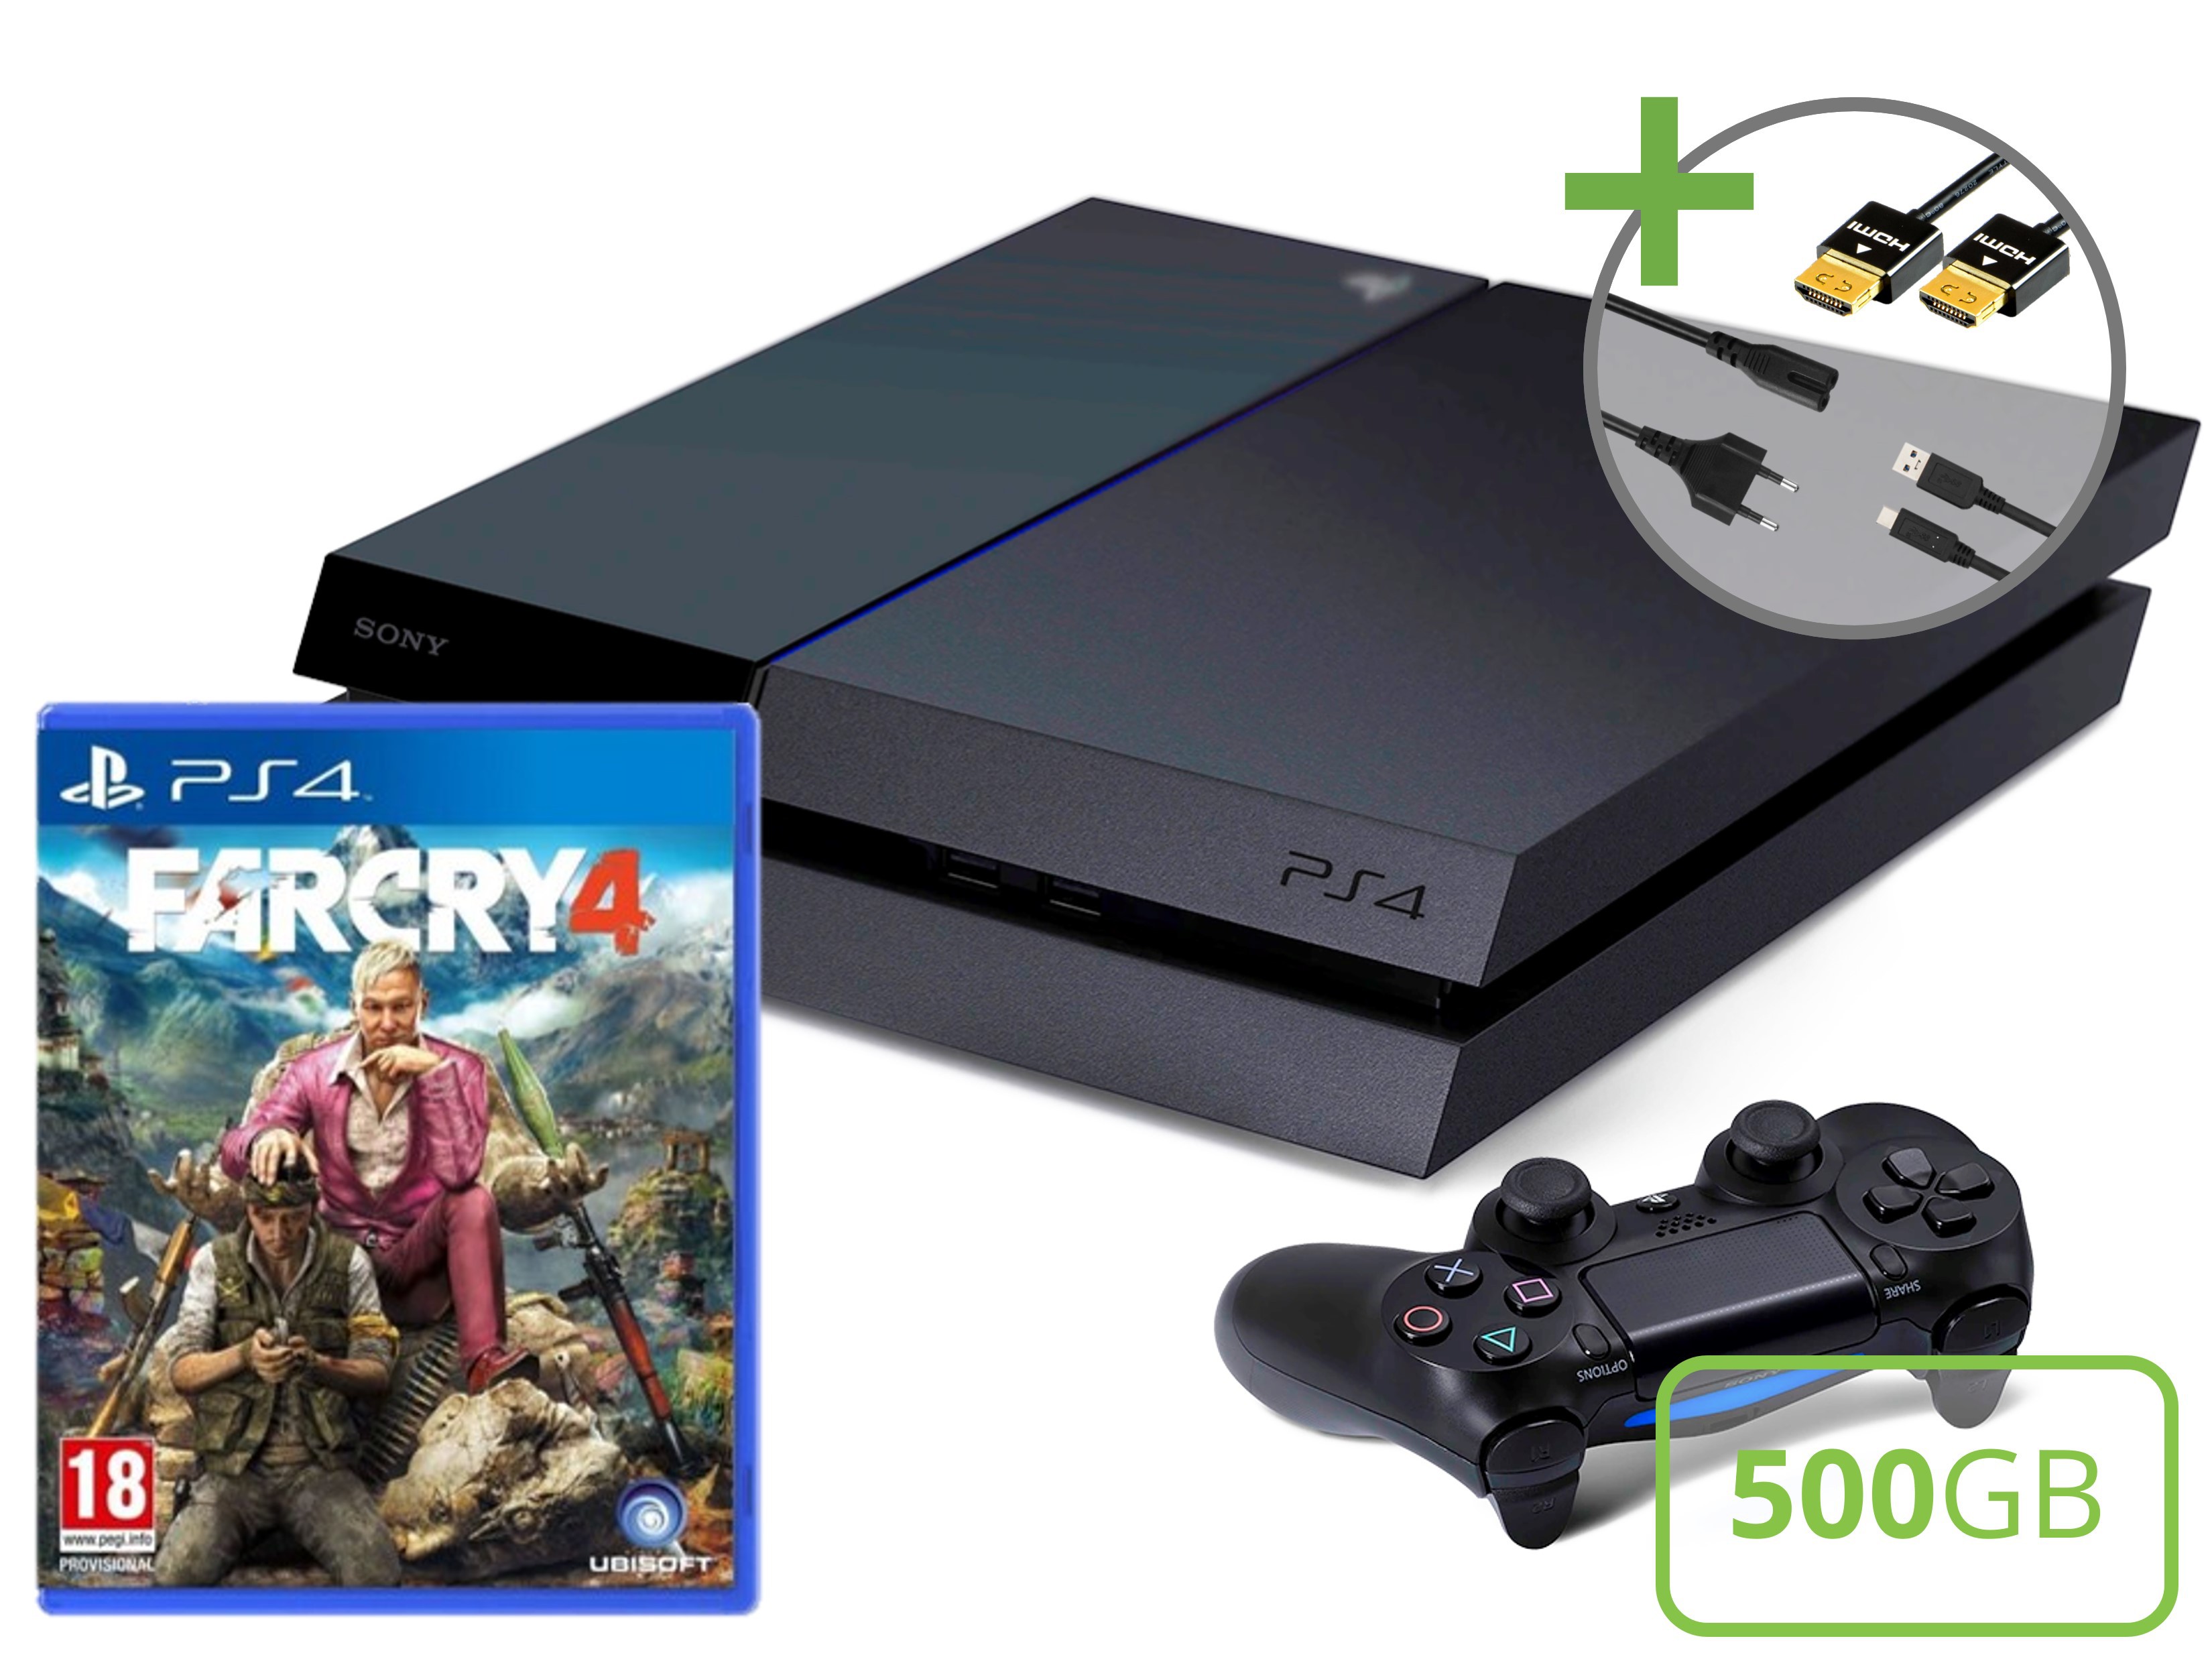 Sony PlayStation 4 Starter Pack - 500GB Far Cry 4 Edition Kopen | Playstation 4 Hardware